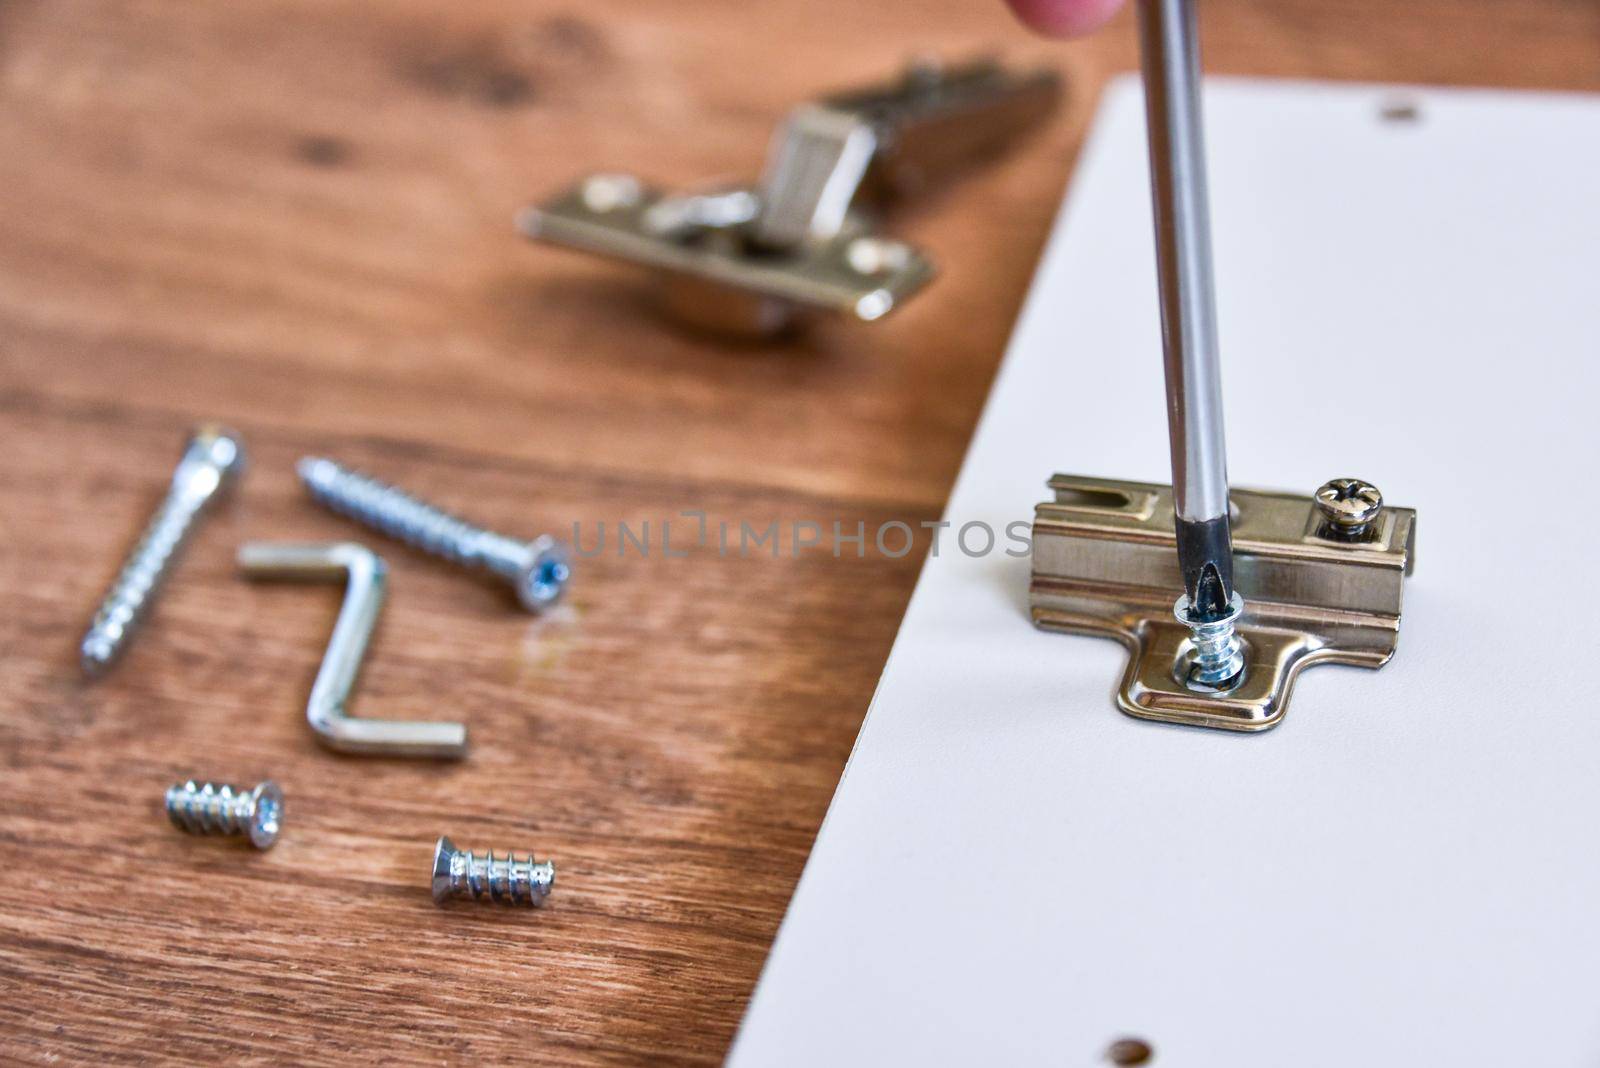 Assembly of cabinet furniture. screwdriver, screws, furniture fittings, door hinges. self-assembly of furniture.